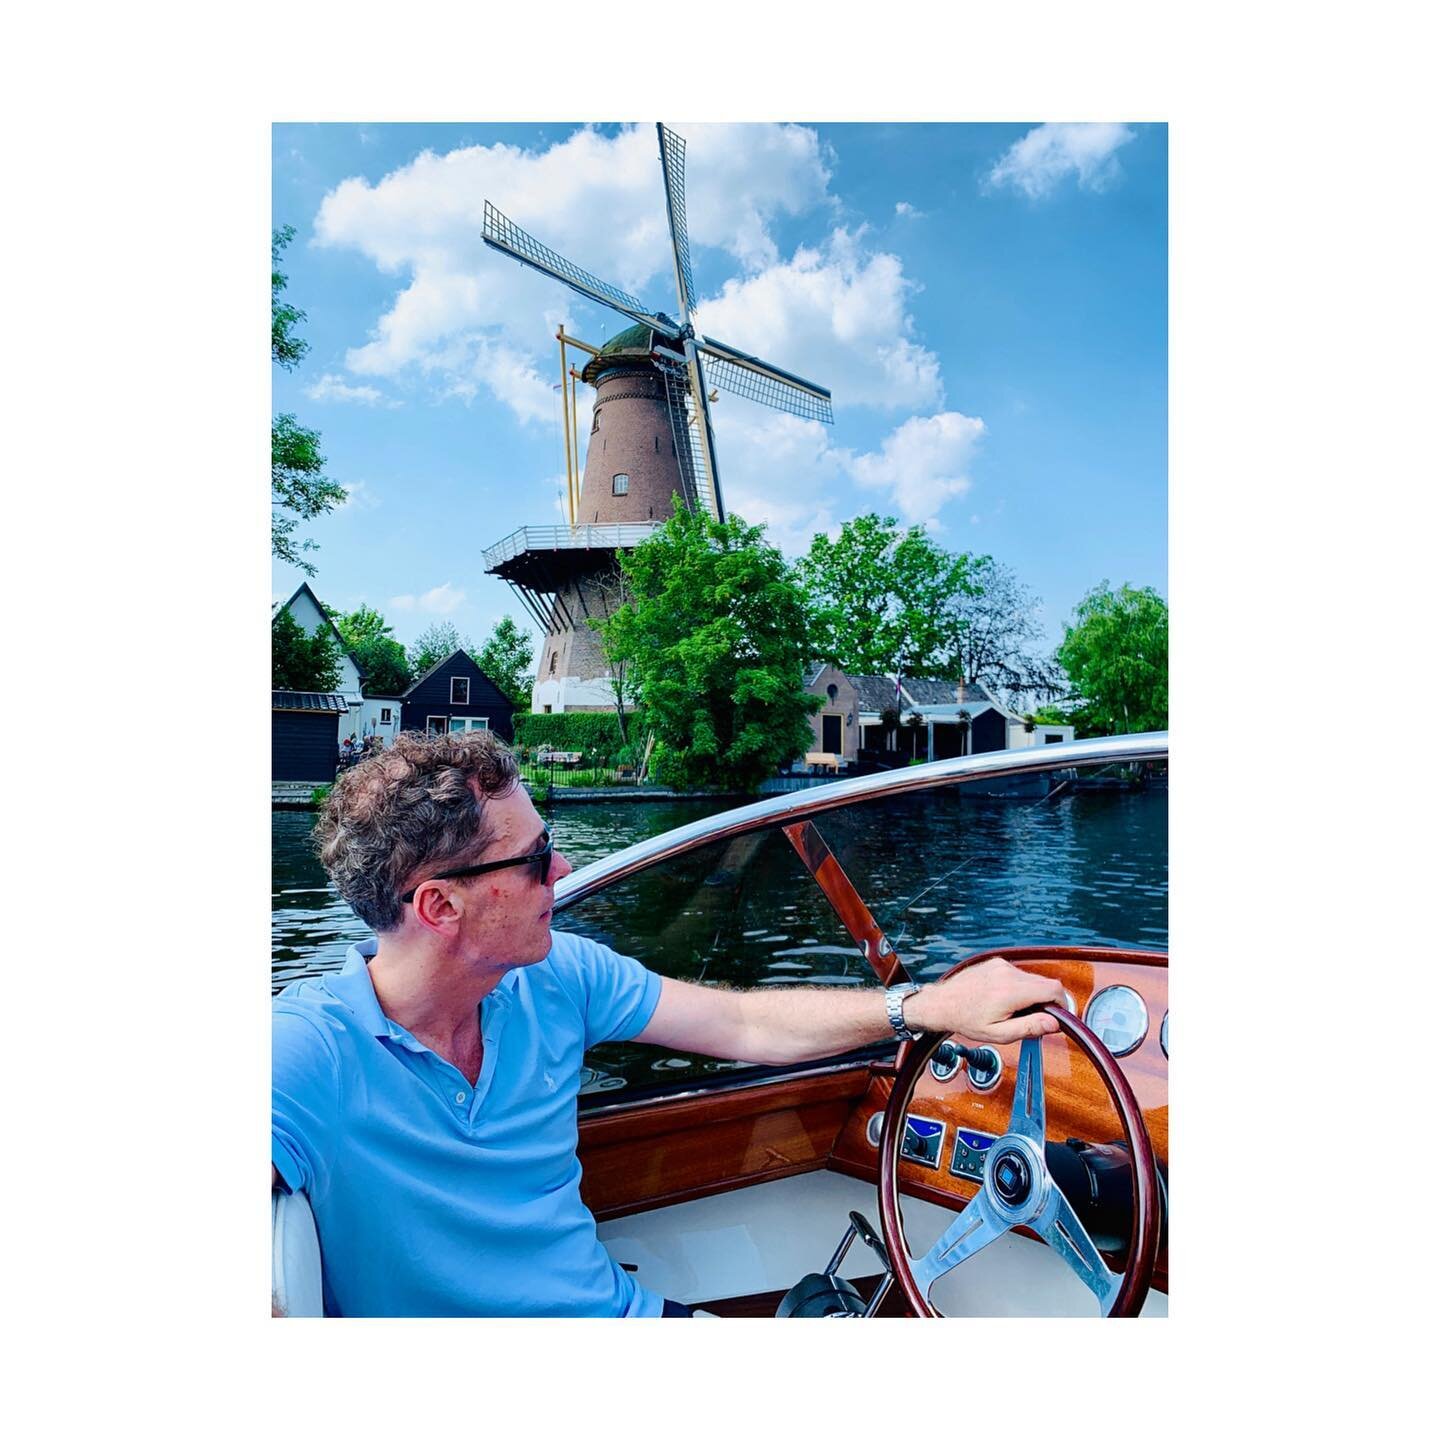 Let&rsquo;s not forget, every Monoposto Yacht is hand made completely in The Netherlands&hellip; So happy to navigate the Dutch waters and enjoy the sights- like windmills. All part of The Spirit of Monoposto... We are The New Tradition in Sporting Y